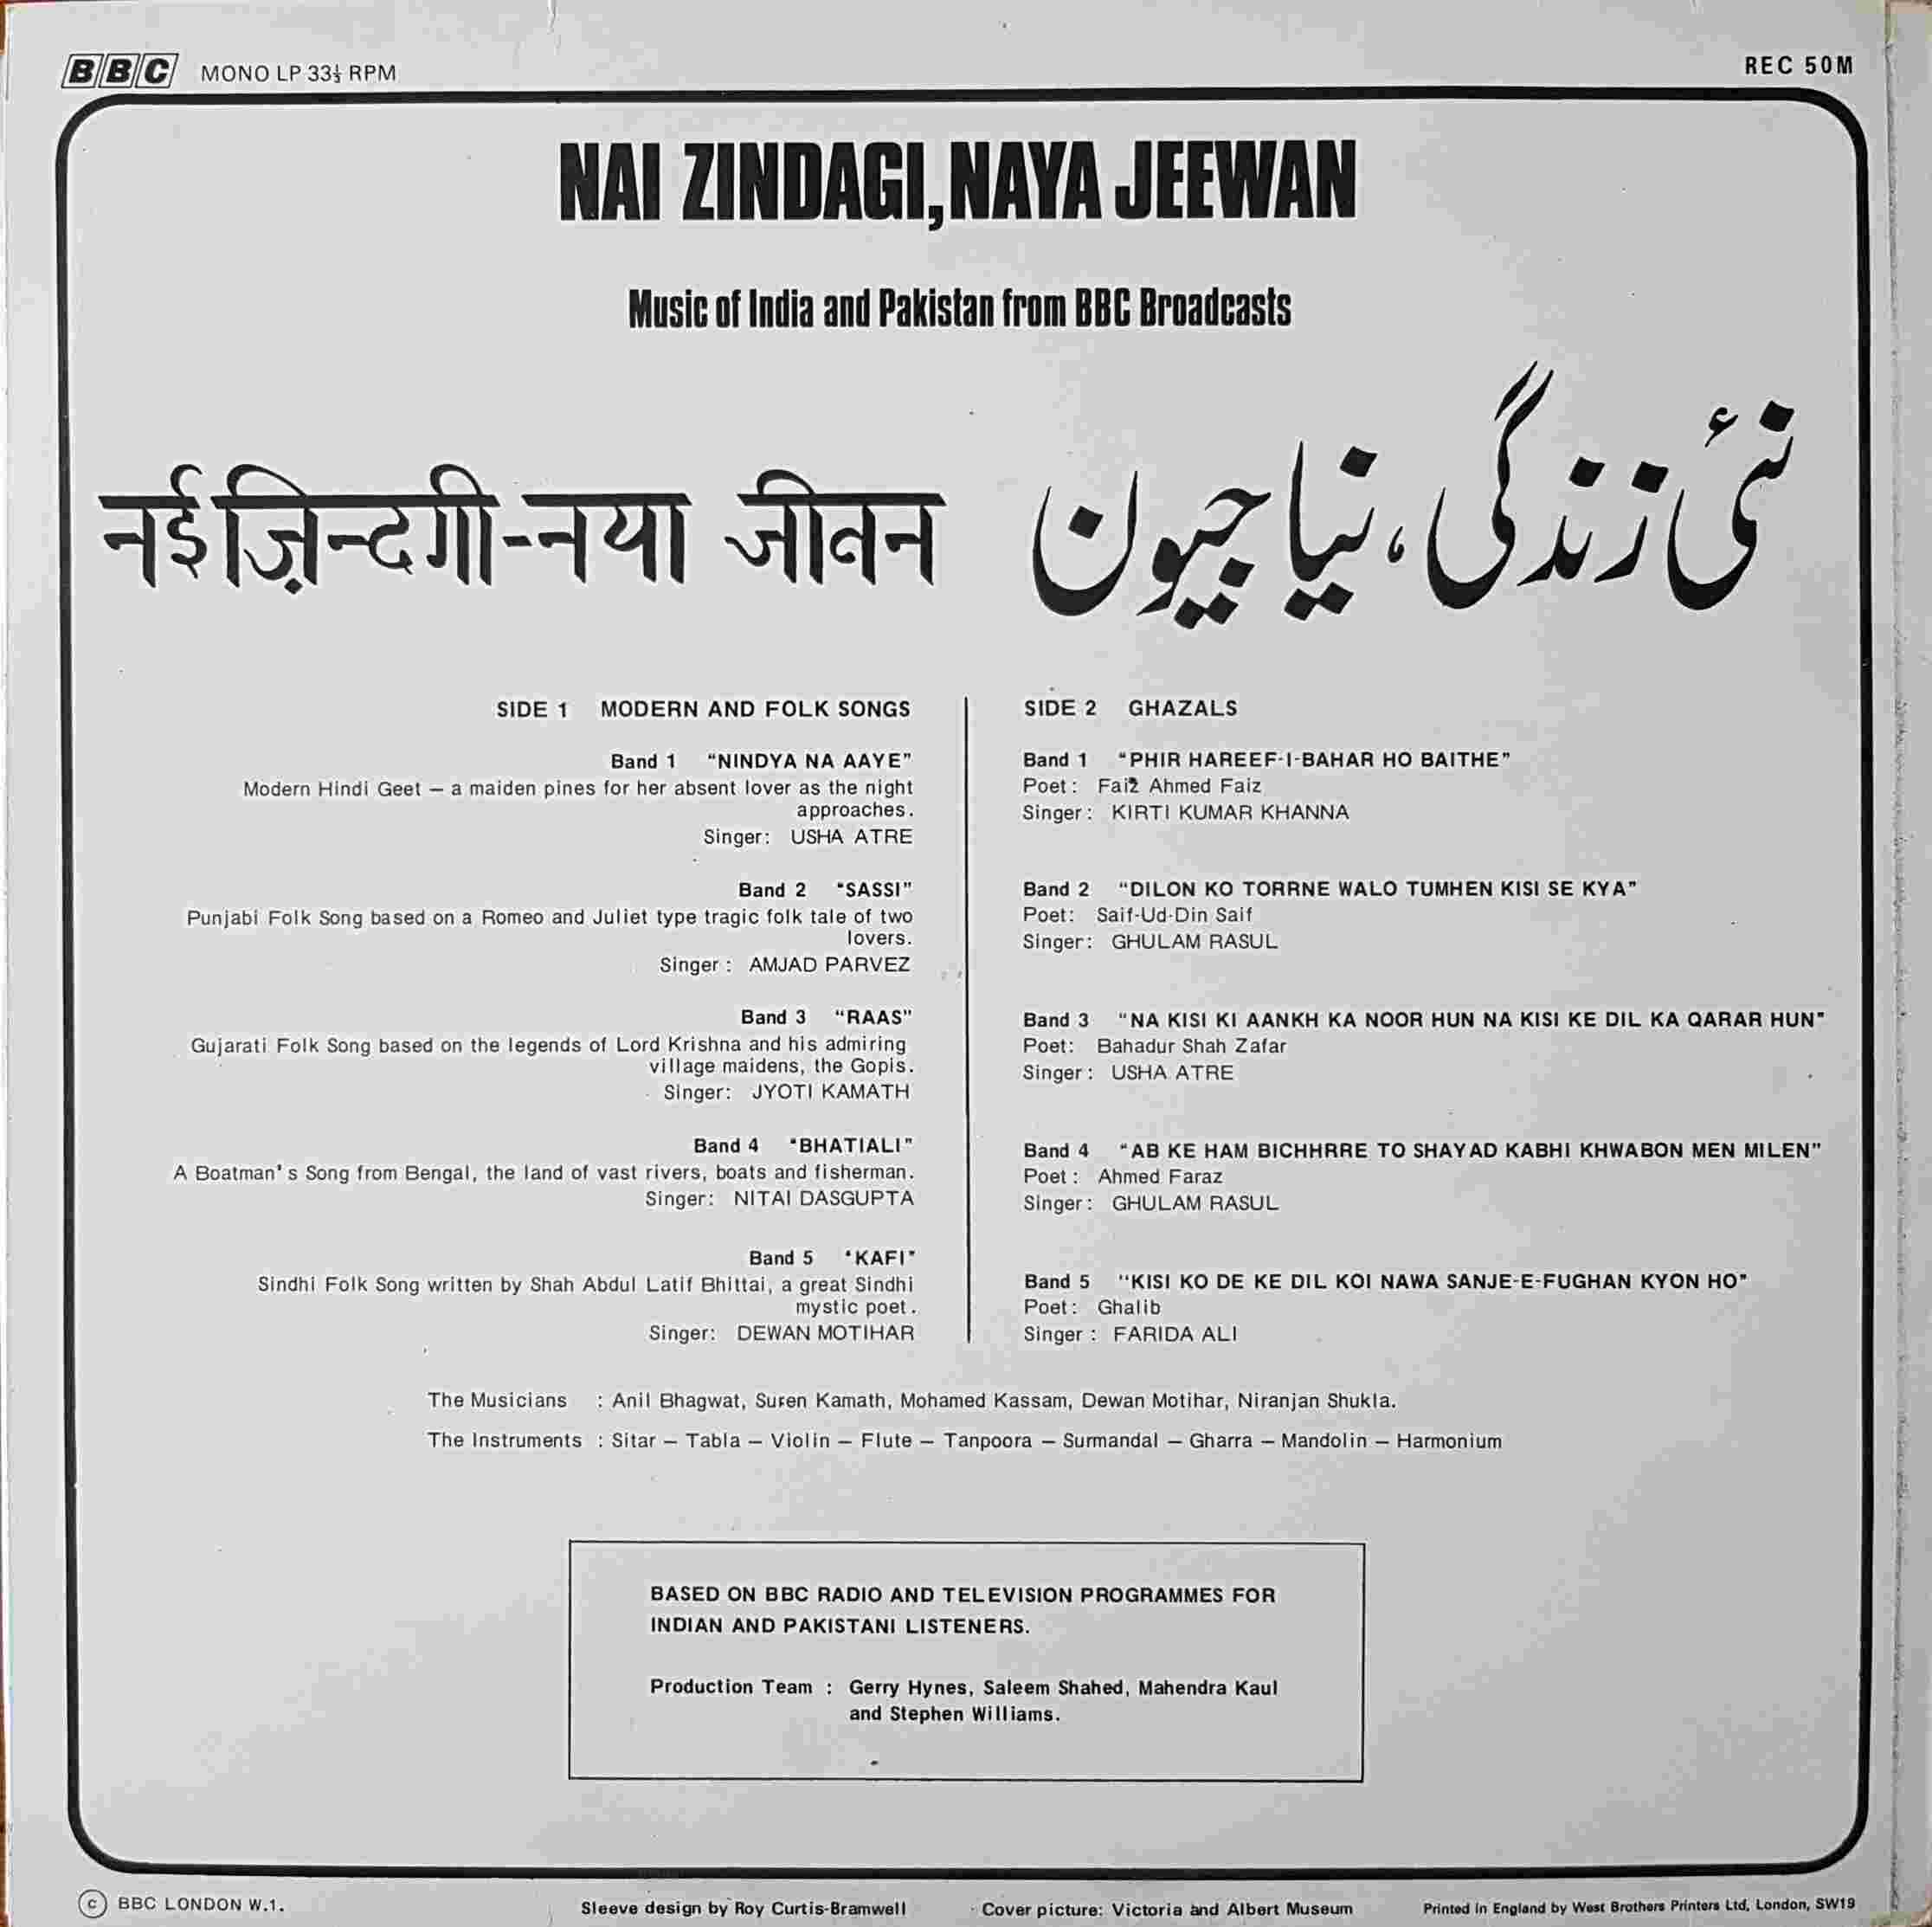 Picture of REC 50 Nai zindagi, naya jeevan - Music of India and Pakistan from BBC broadcasts by artist Various from the BBC records and Tapes library